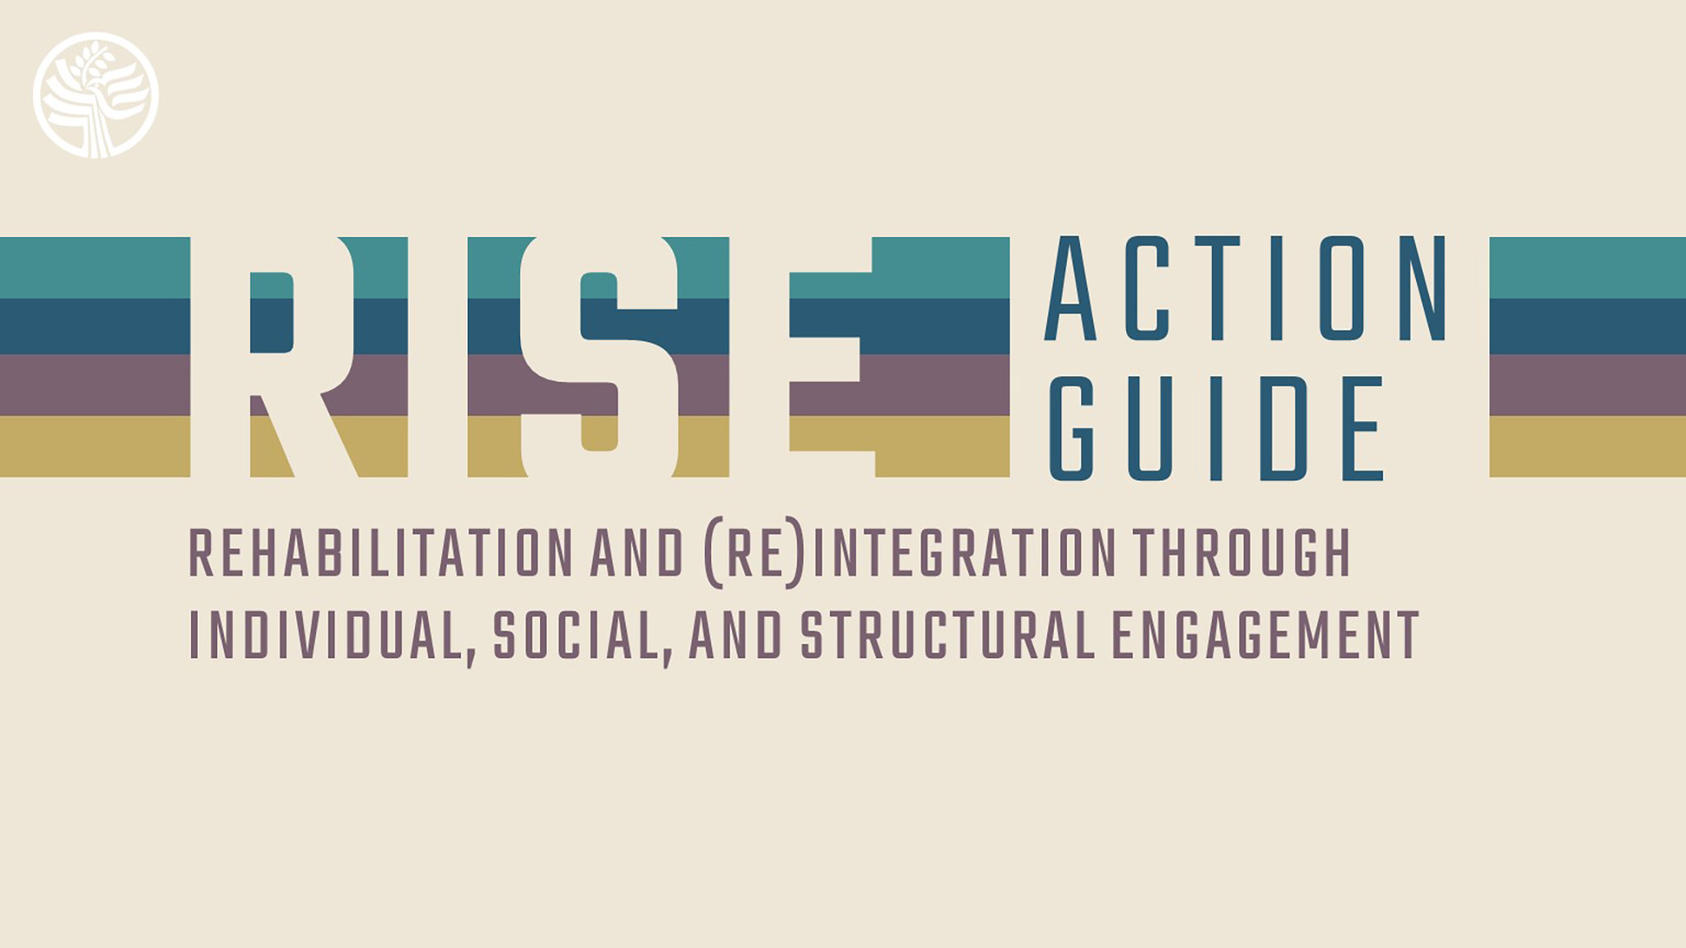 RISE Action Guide: Rehabilitation and Reintegration through Individual, Social, and Structural Engagement